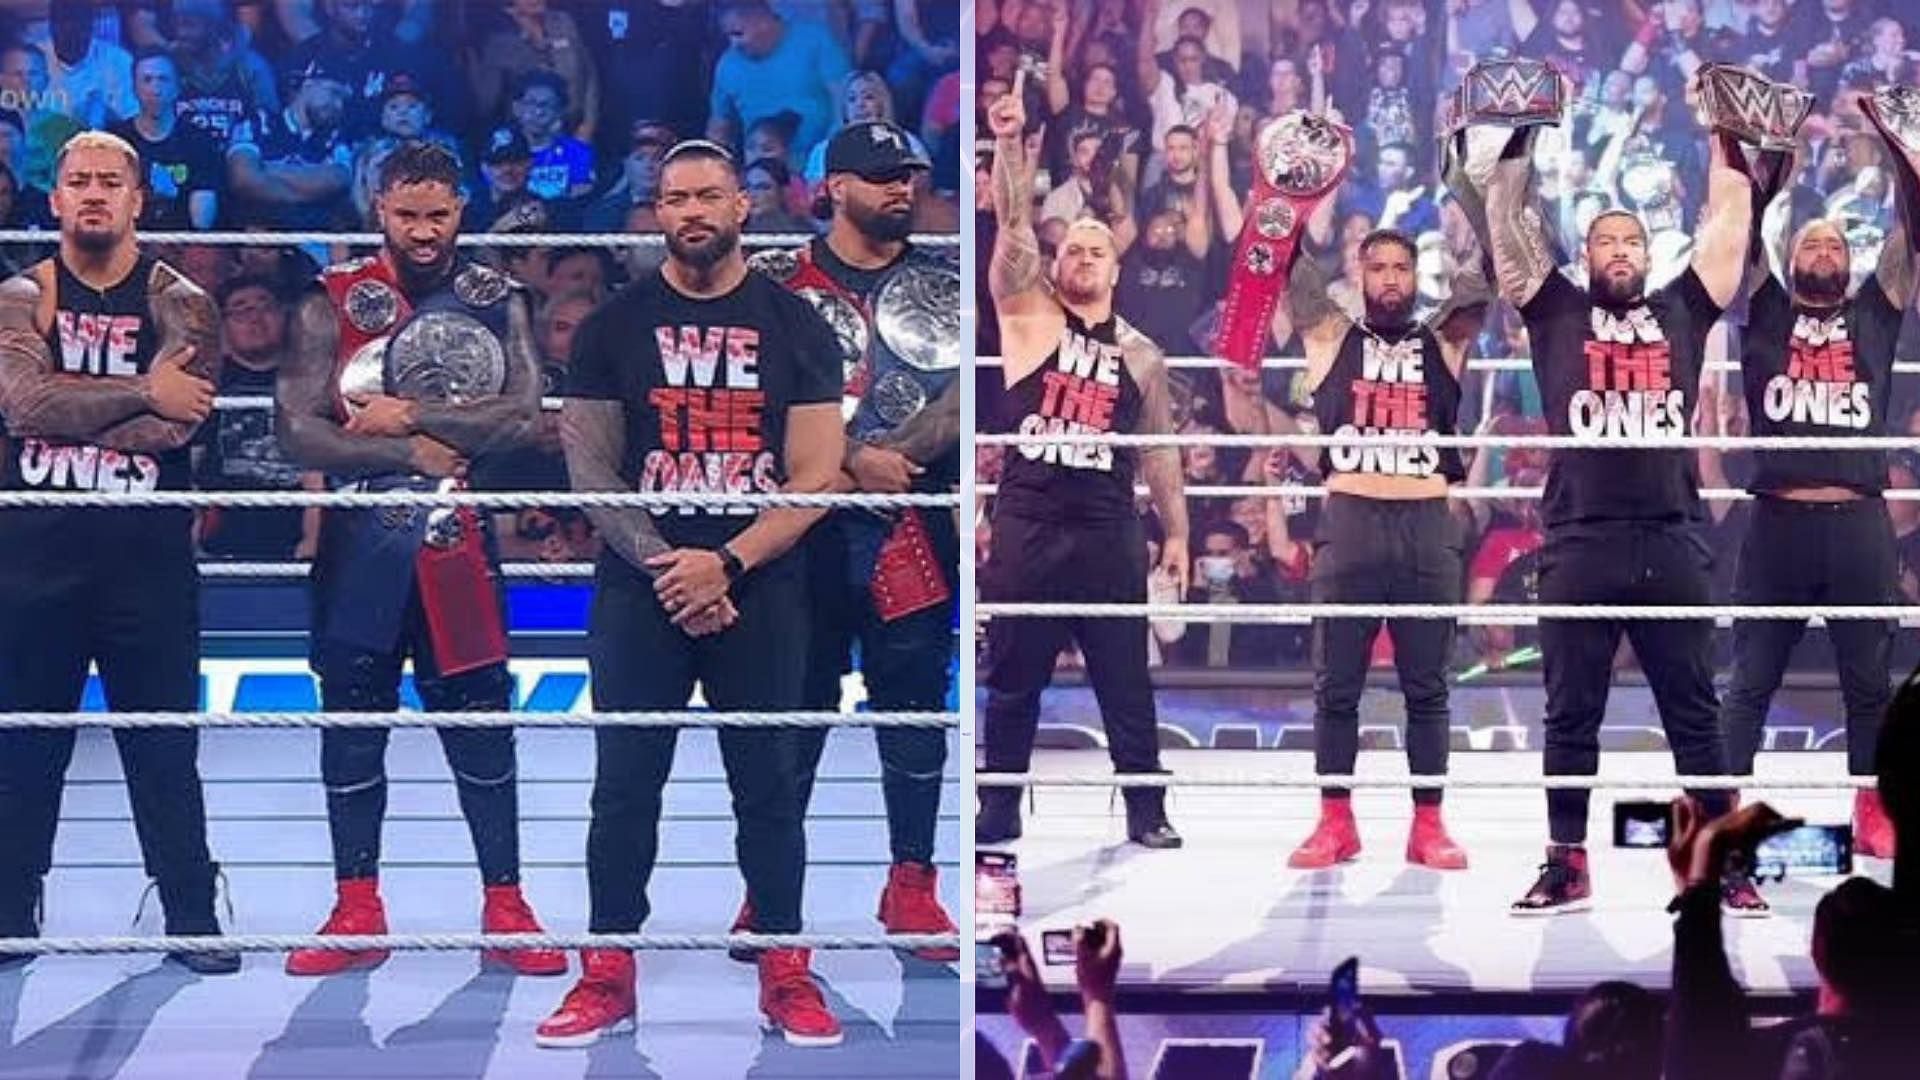 The Bloodline is the top faction on WWE SmackDown.